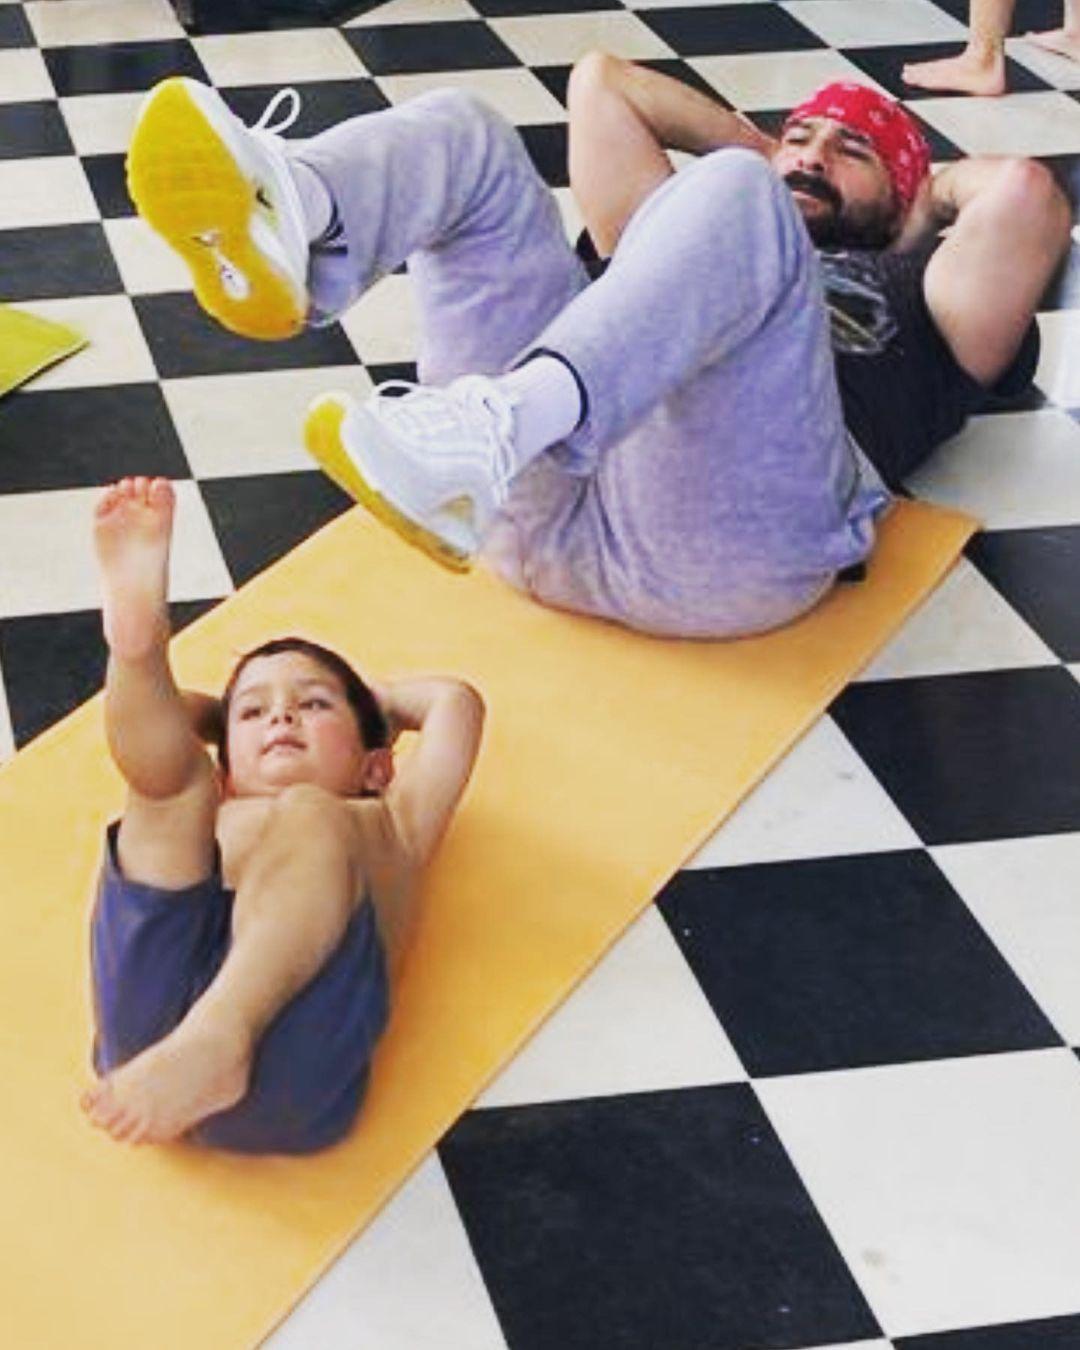 Kareena shared two photos. In the second one, Saif and their youngest son Jeh are seen sharing a mat as they try to pull off bicycle crunches, or whatever this is